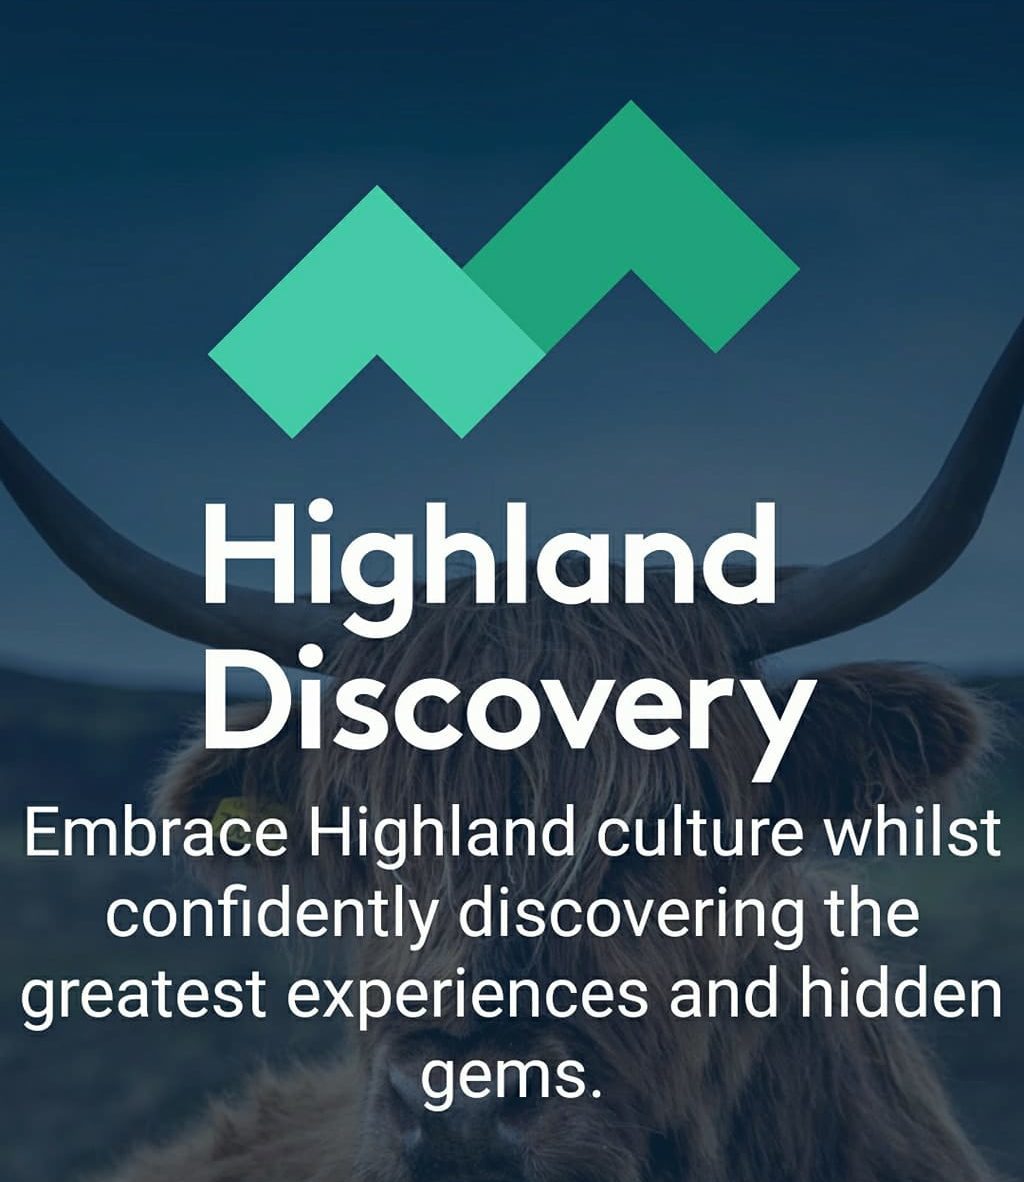 The Highland Discovery app was put together with work by primary and secondary school children as well as students of Napier University.